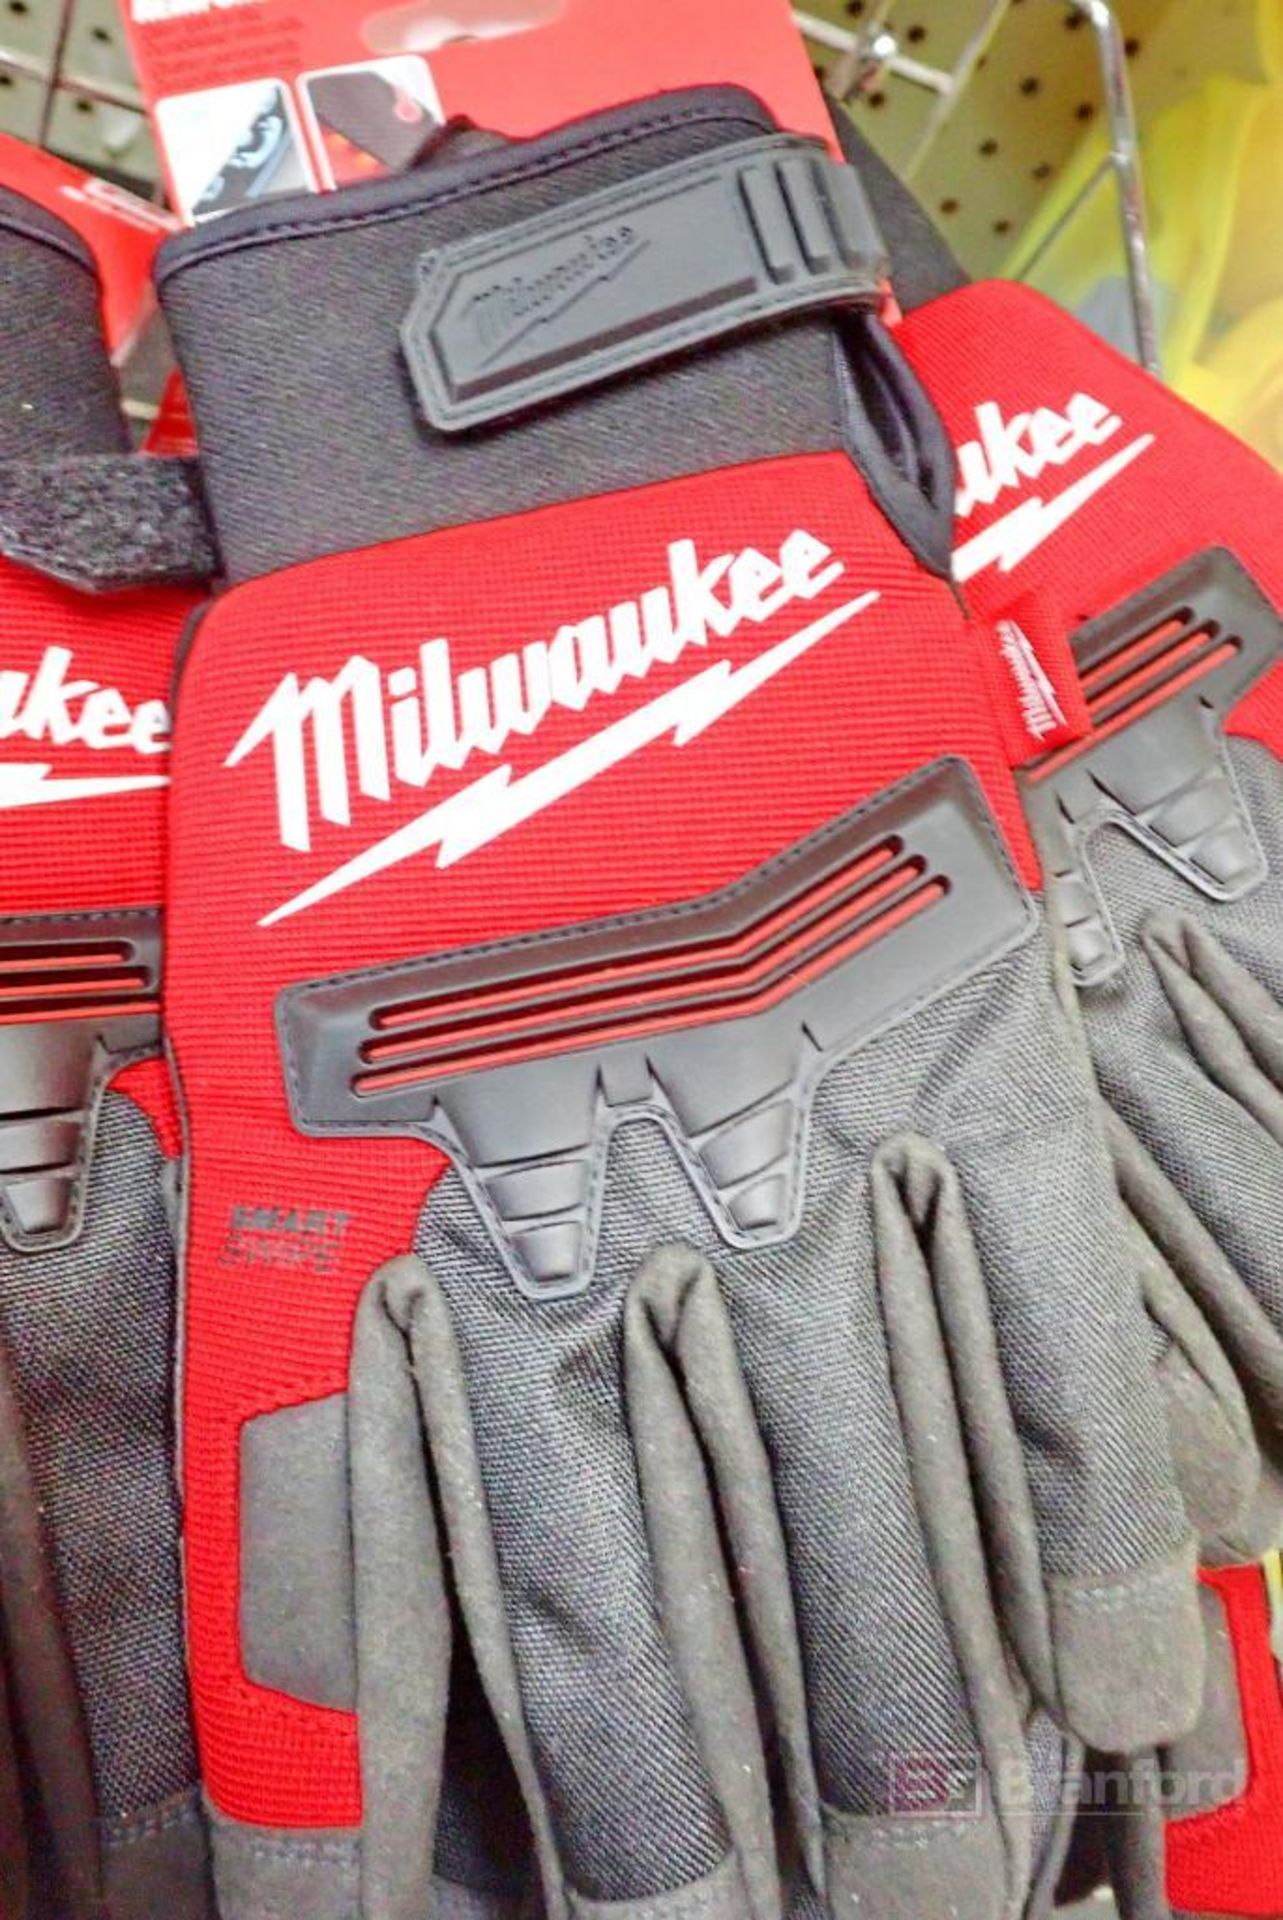 Box Lot of Milwaukee Winter Demo Gloves - Image 2 of 2